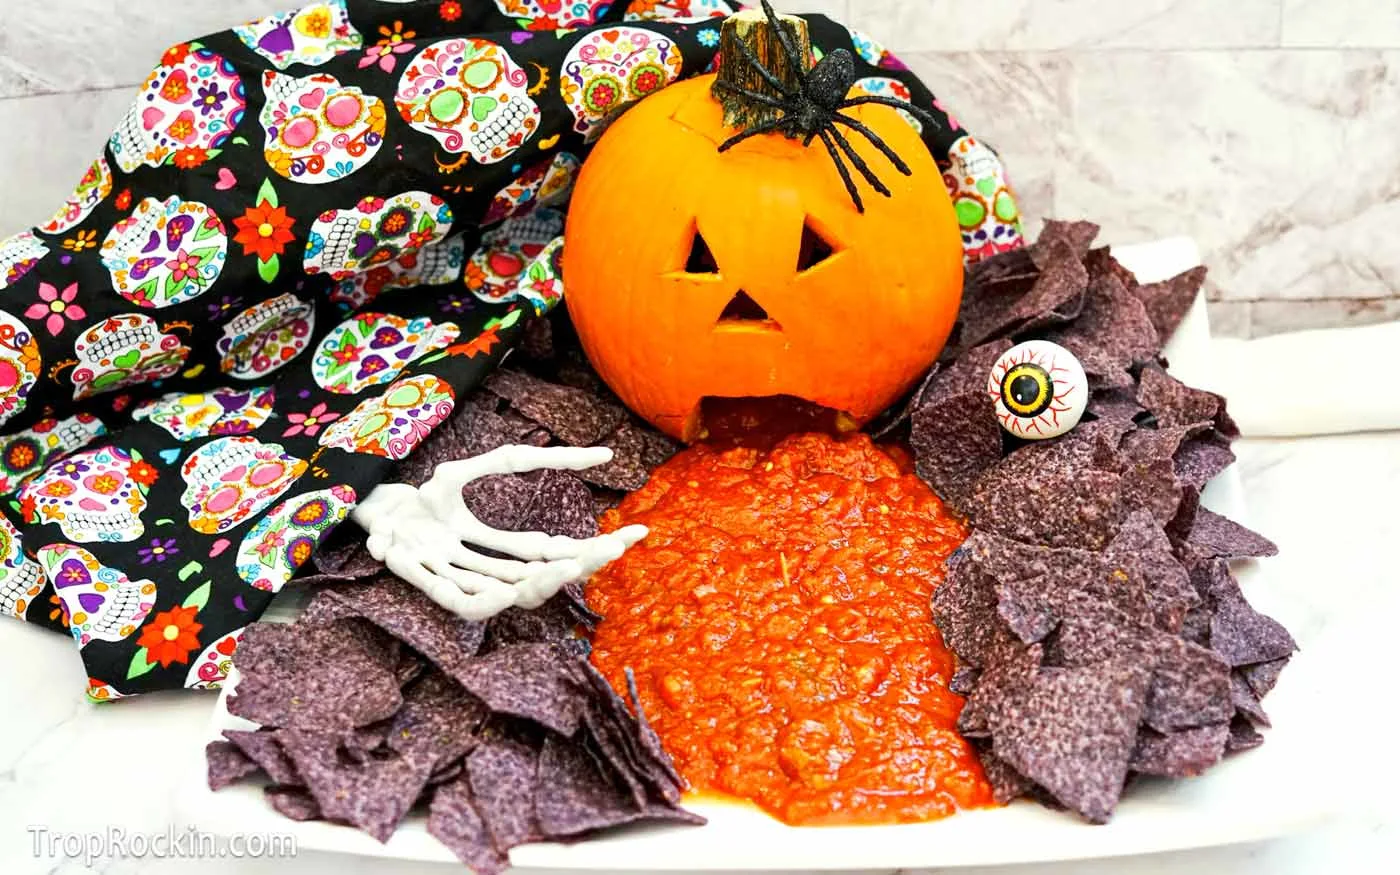 Puking Pumpkin with blue corn chips and salsa coming out of the pumpkin mouth with halloween decorations.